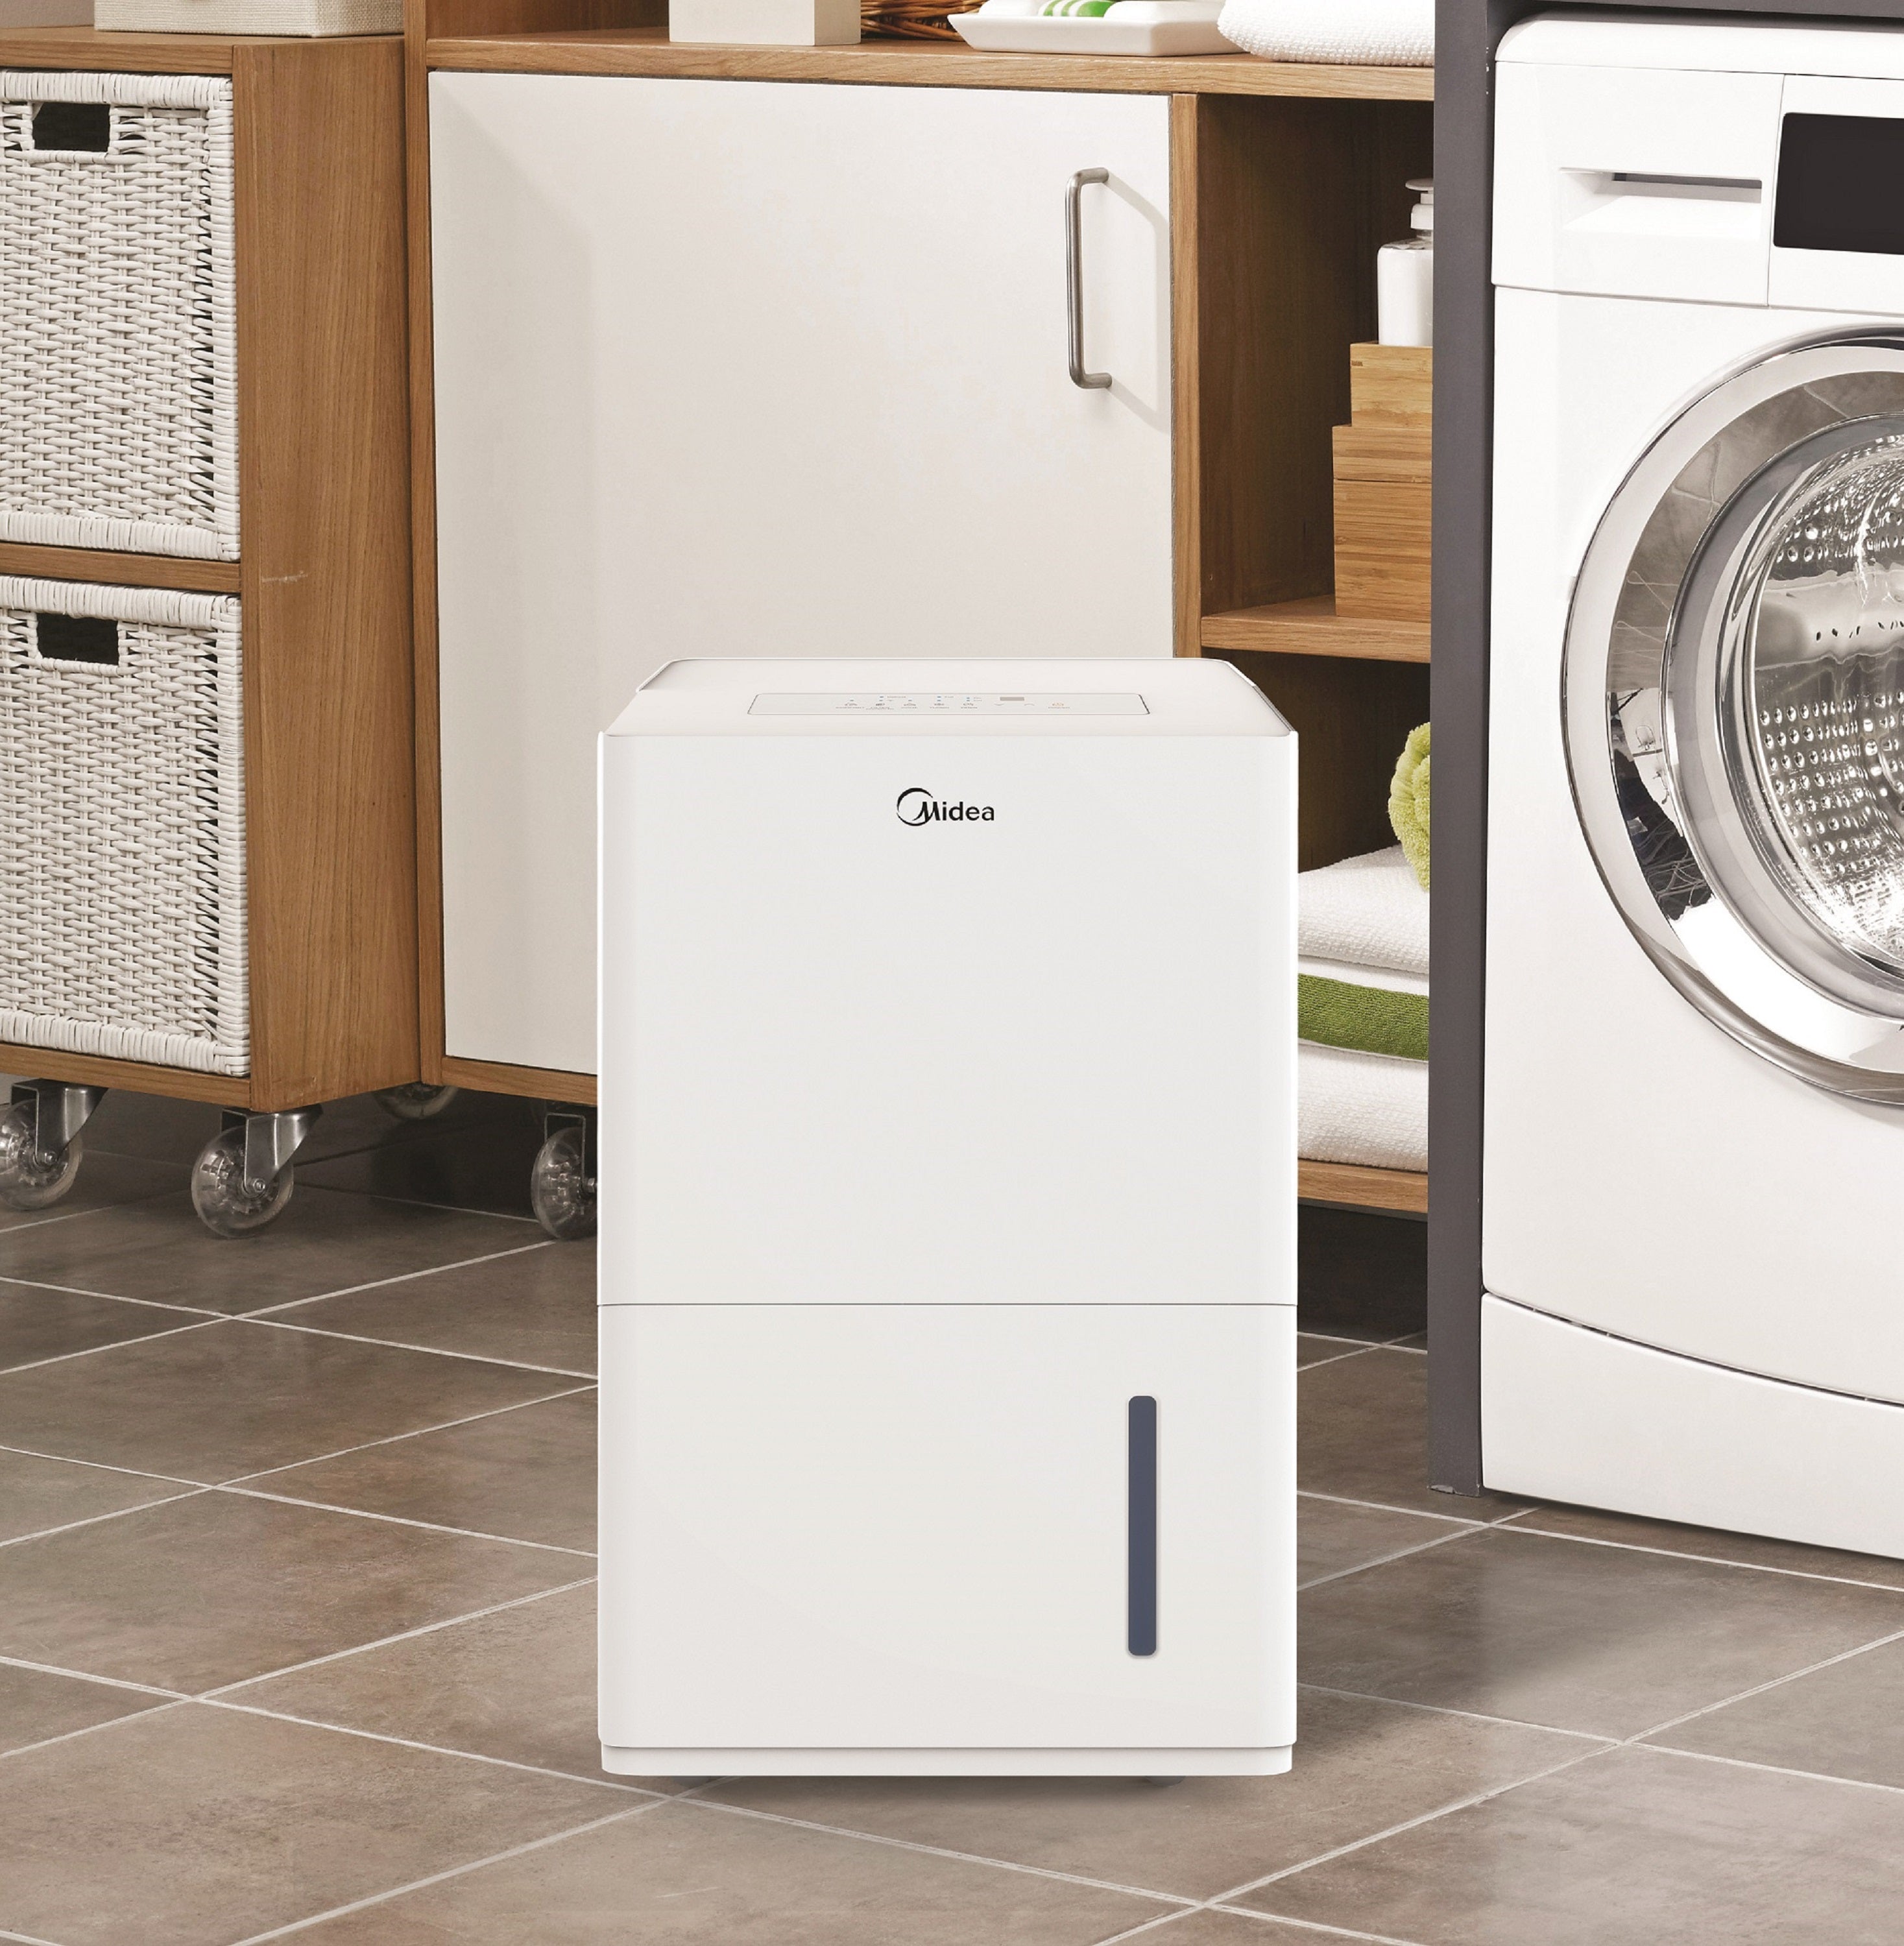 Restored Midea 35-Pint Energy Star Smart Dehumidifier for Very Damp Rooms, White, MAD35S1WWT (Factory Refurbished)